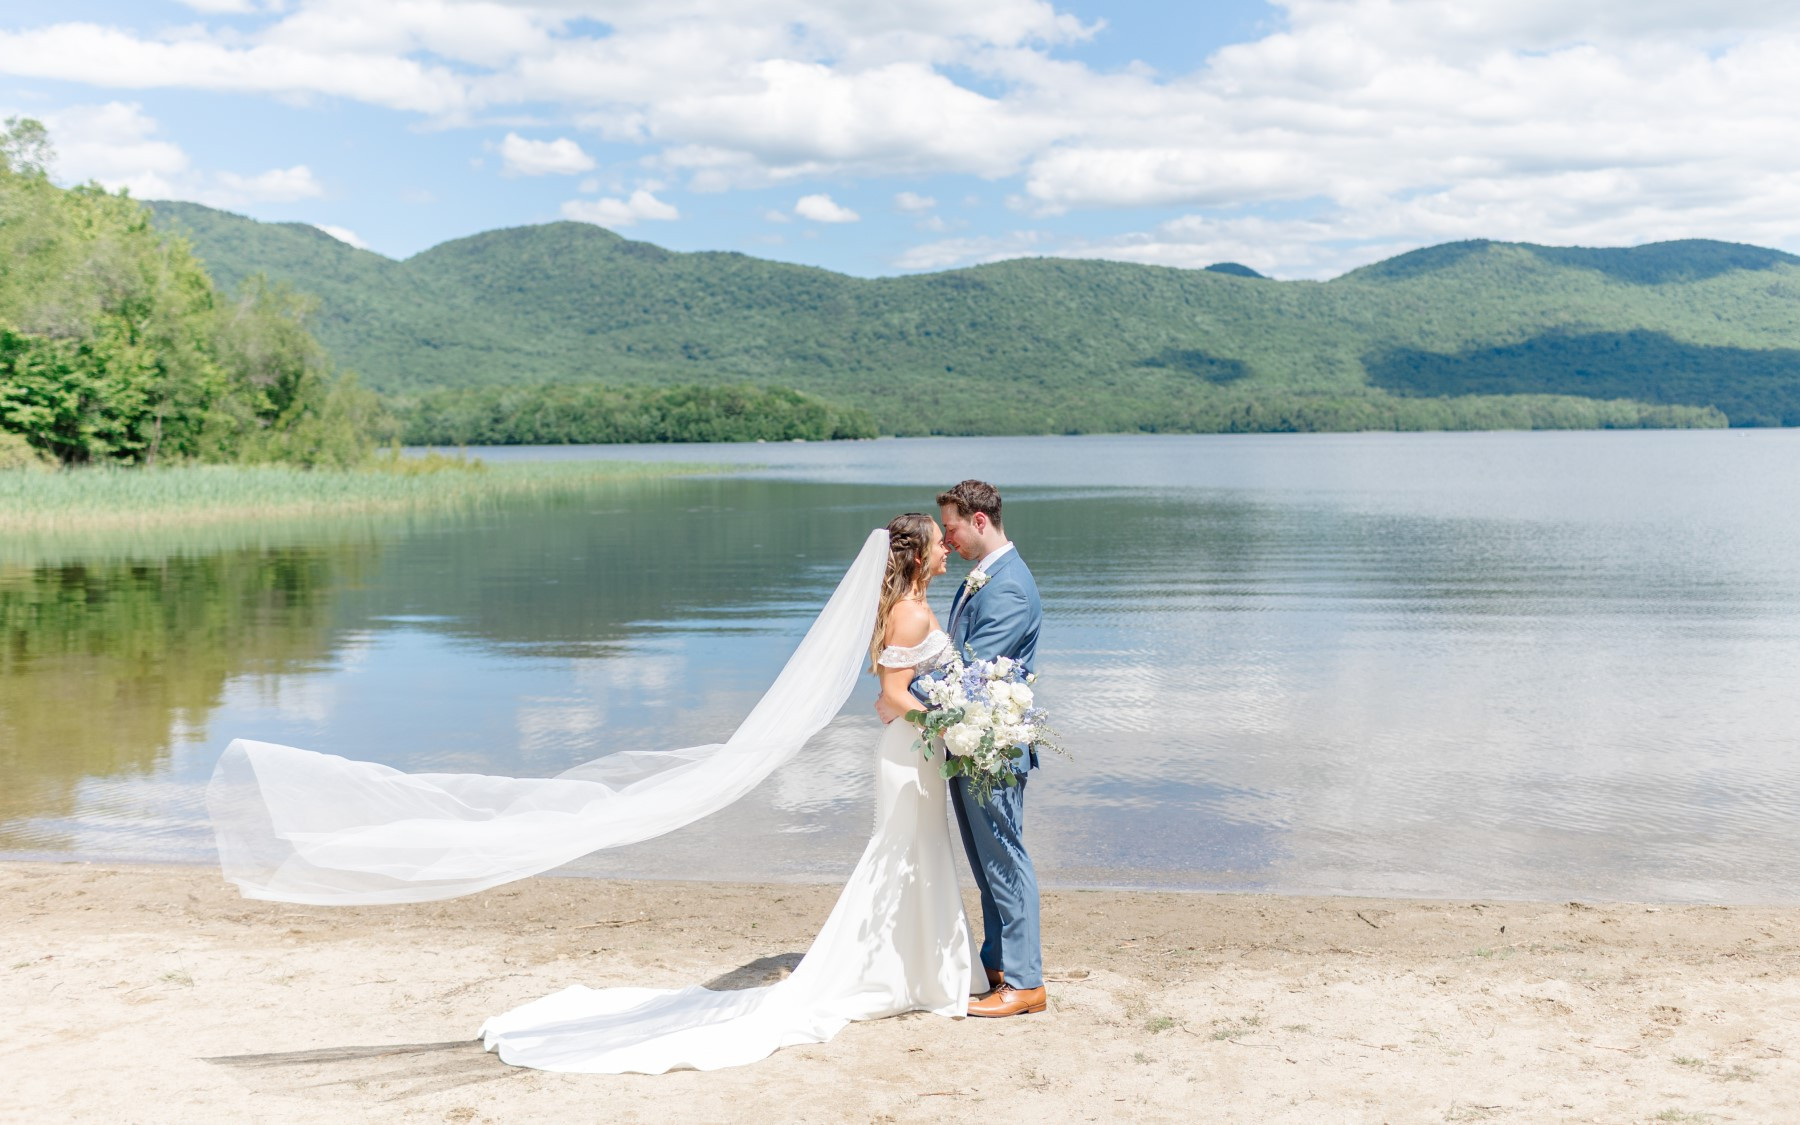 Groom and bride holding each other down by the lake's edge. The brides veil is flowing in the wind and the mountains are in the background.